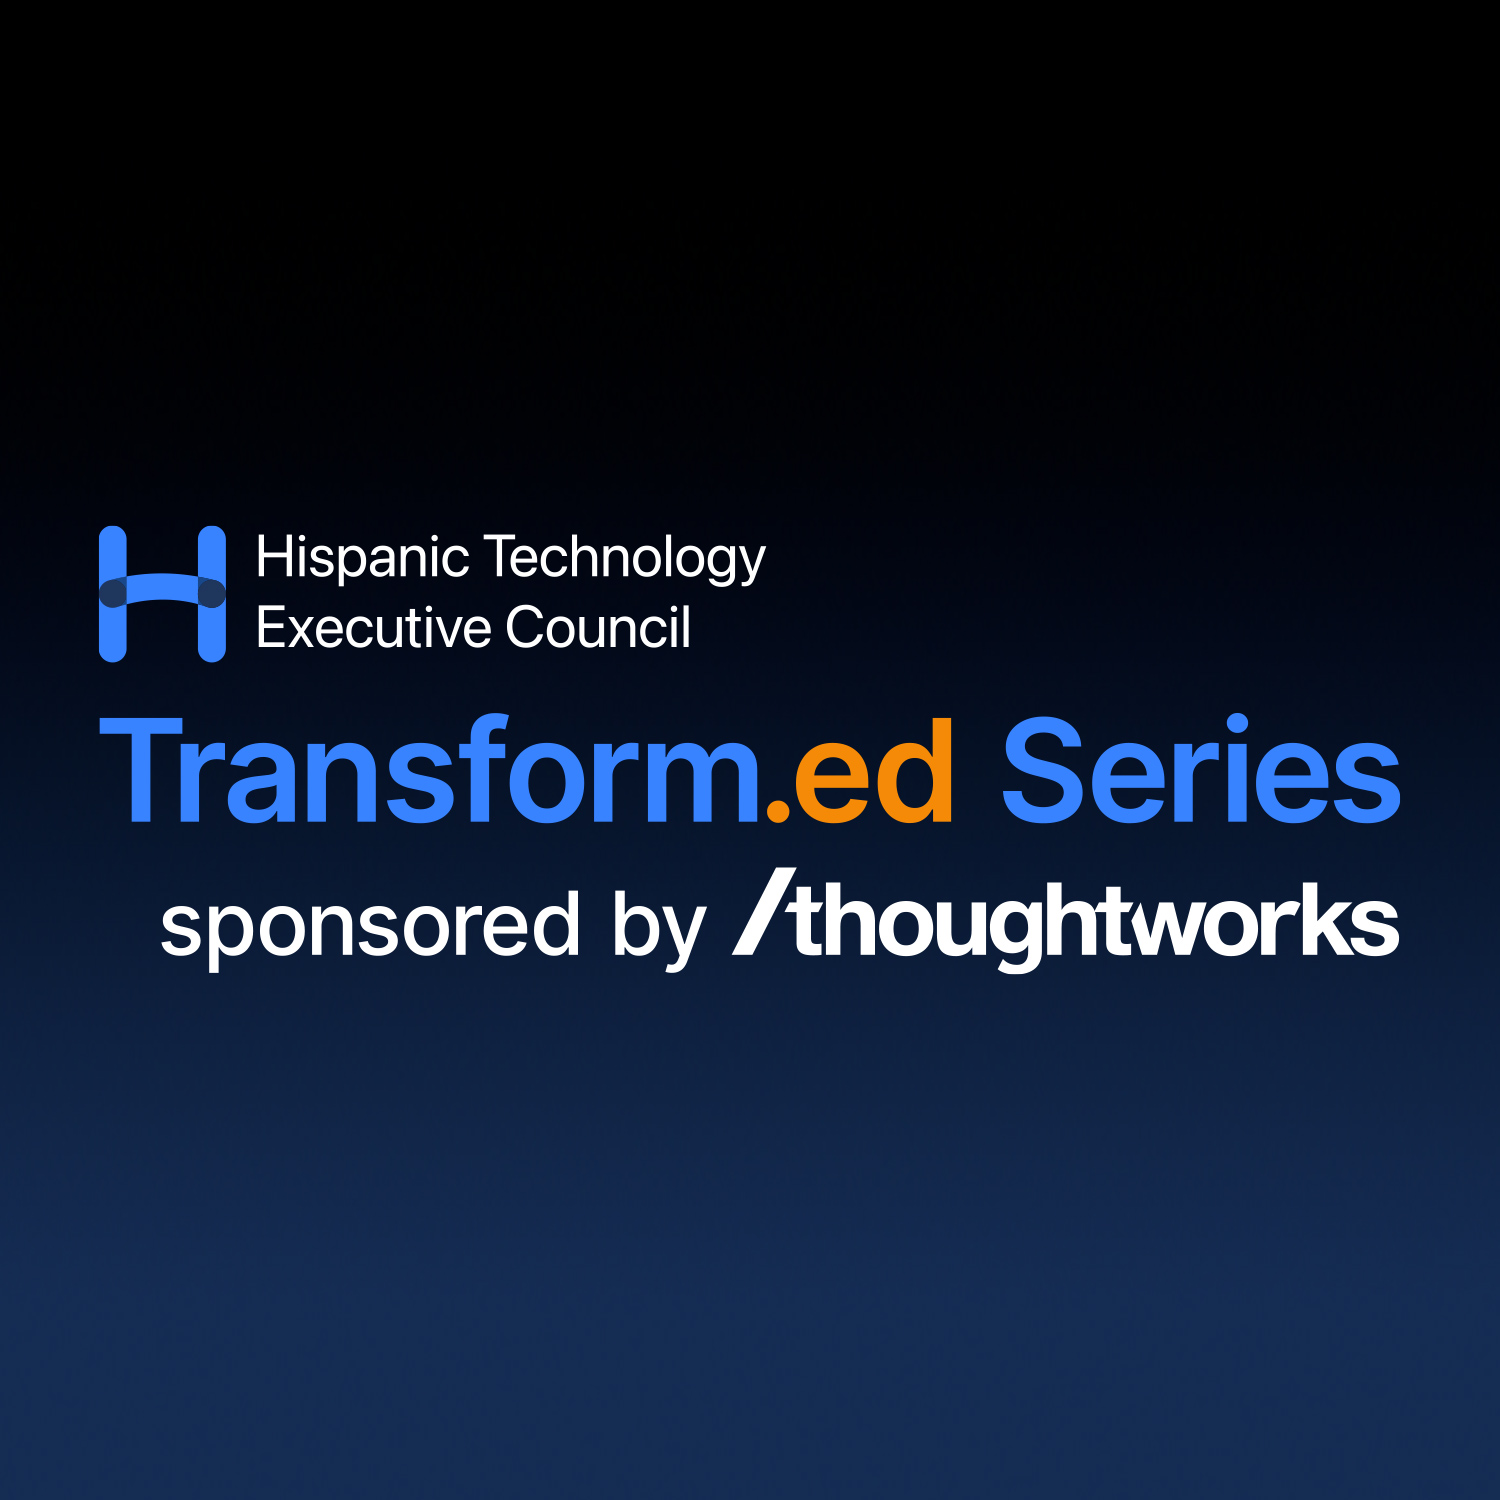 HITEC Transformed Series, sponsored by Thoughtworks